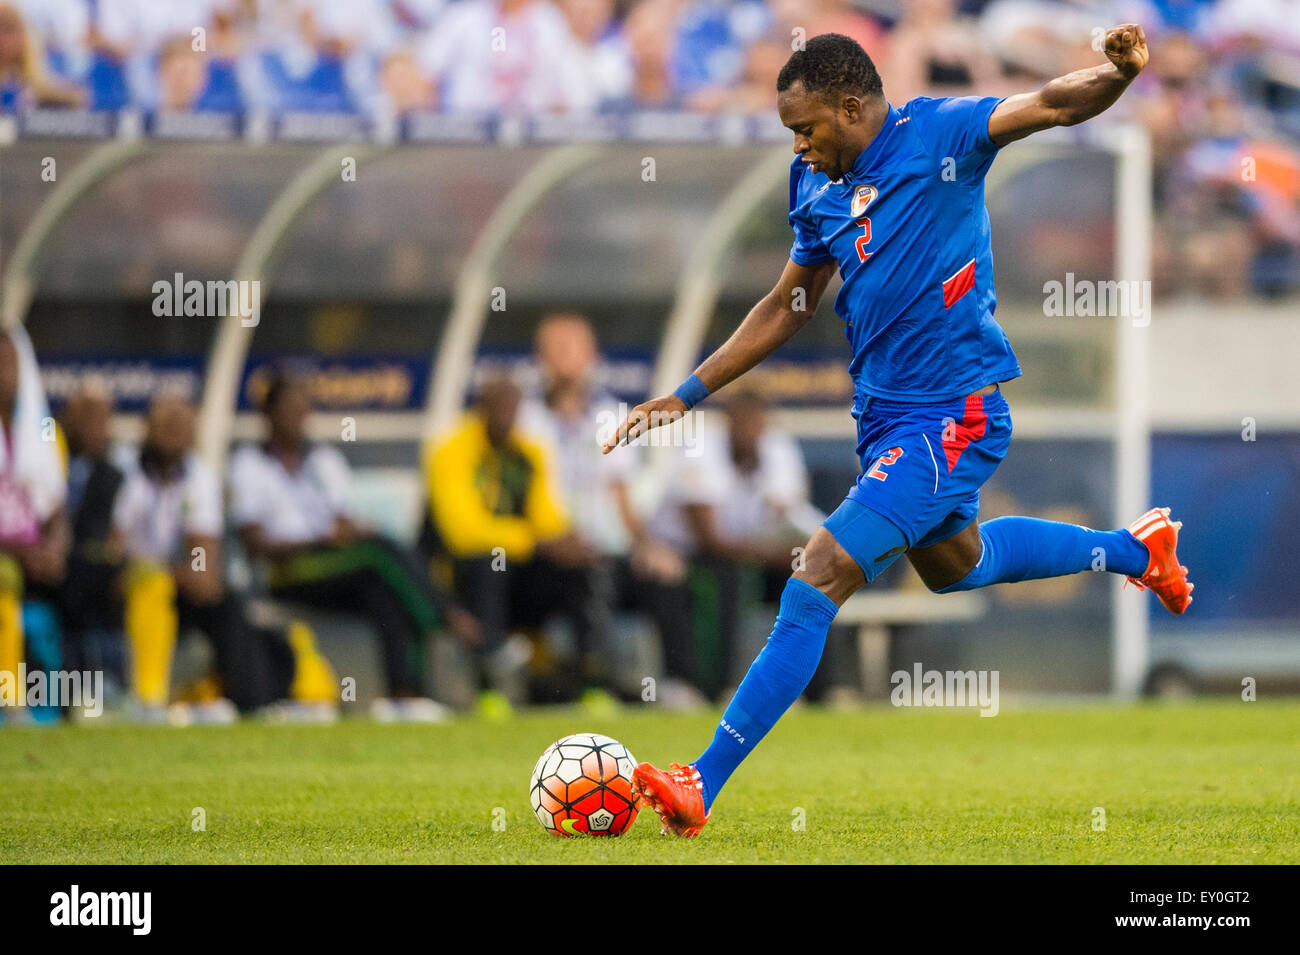 Baltimore, MD, USA. 18th July, 2015. #2 Haiti M Jean Sony Alcenat during  the CONCACAF Gold Cup quarterfinal match between Haiti and Jamaica at M&T  Bank Stadium in Baltimore, MD. Jacob Kupferman/CSM/Alamy